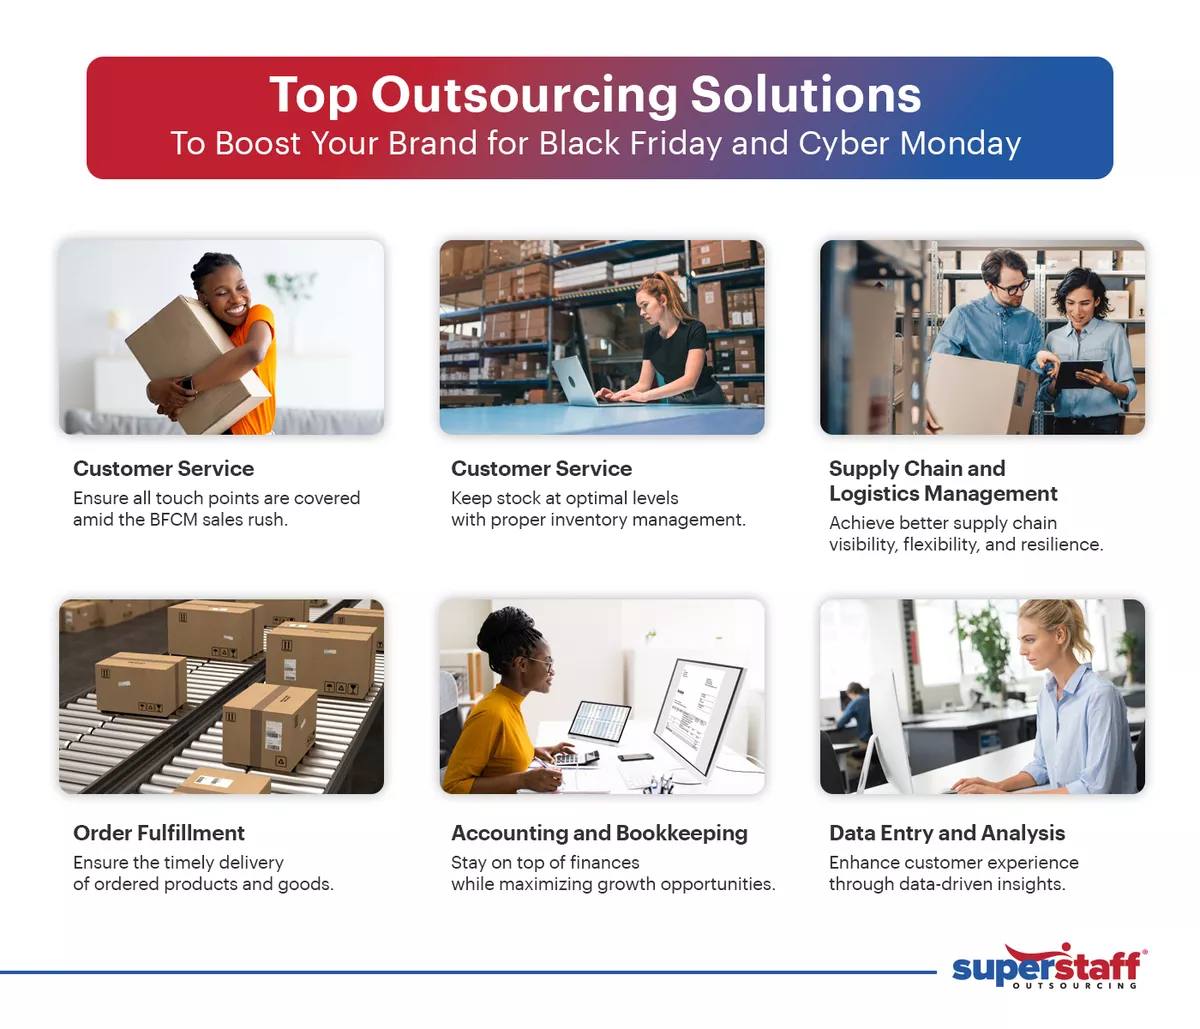 An infographic shows top 6 outsourcing solutions for Black Friday and Cyber Monday.